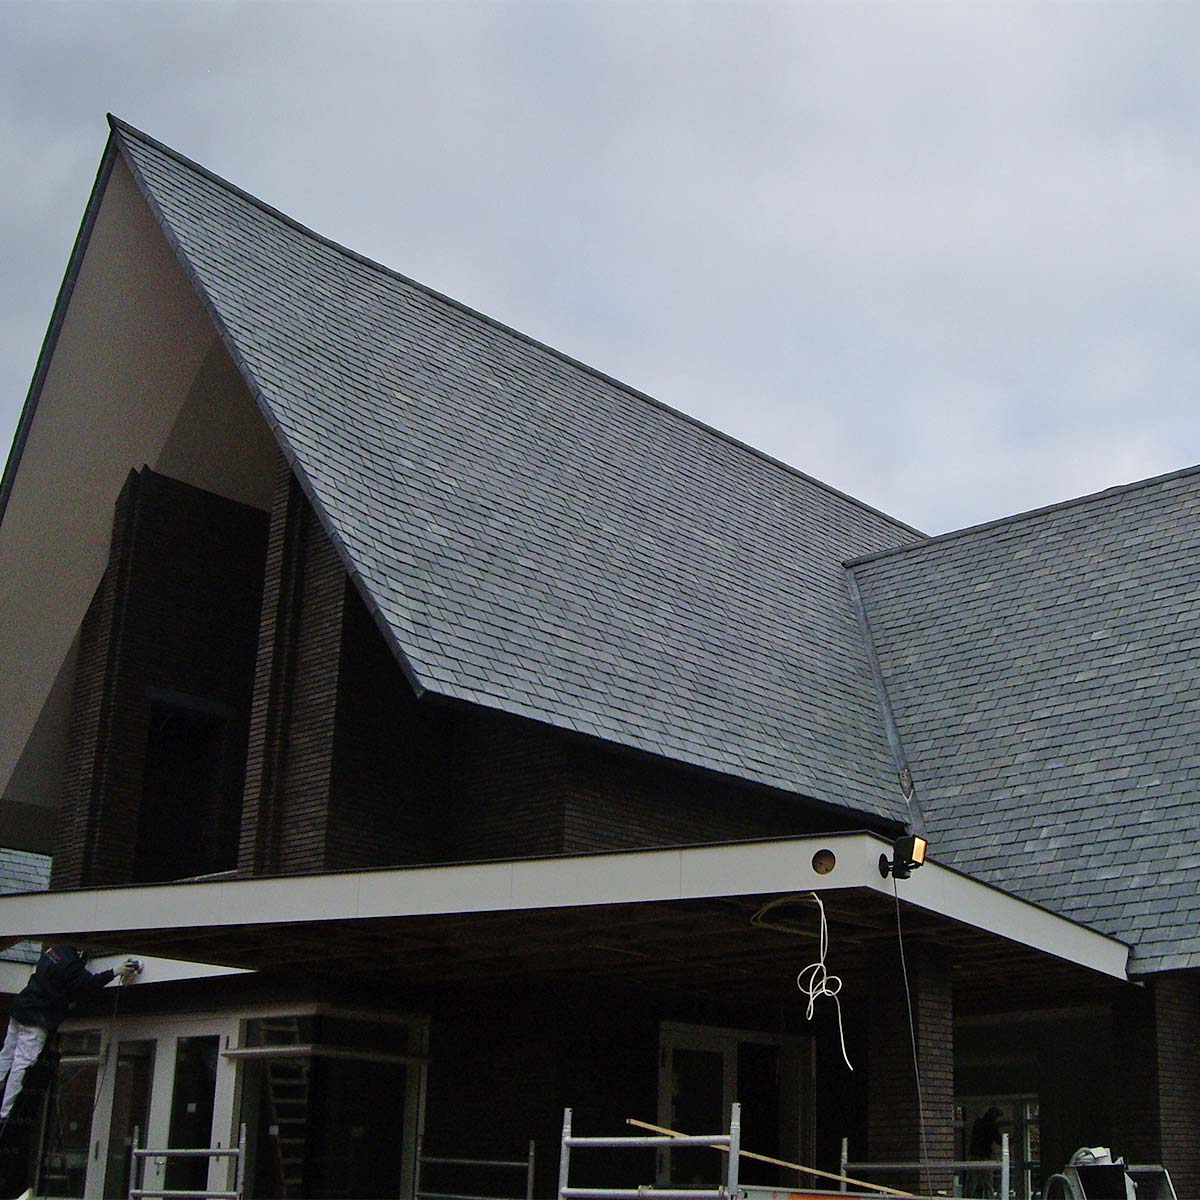 Clearance slate roof, Roofing Slate Direct